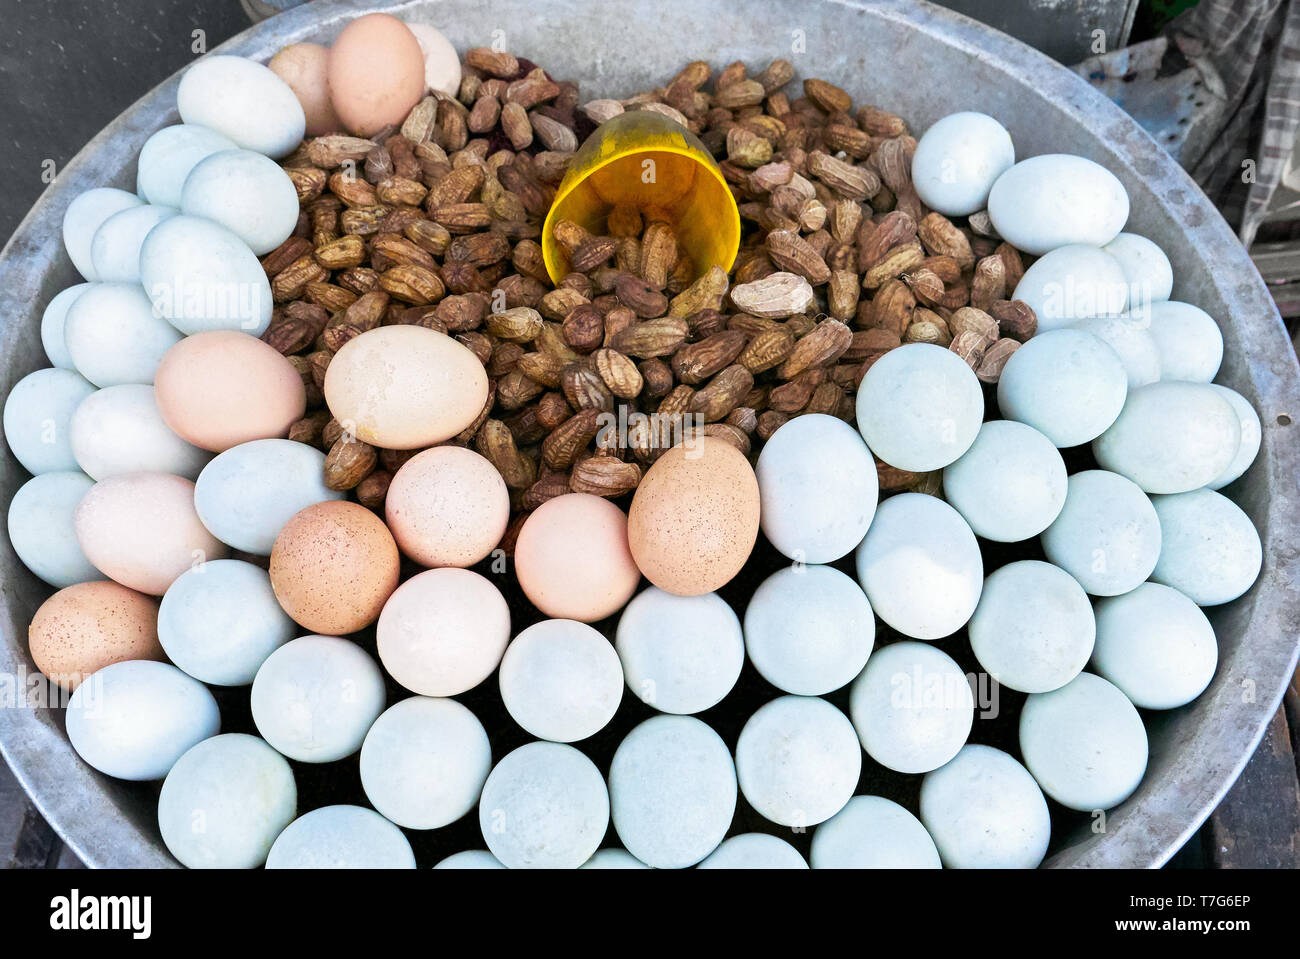 Close-up of steamed peanuts and white and brown boiled eggs, all nicely presented in a metal bowl with a measuring cup, for sale in the street Stock Photo